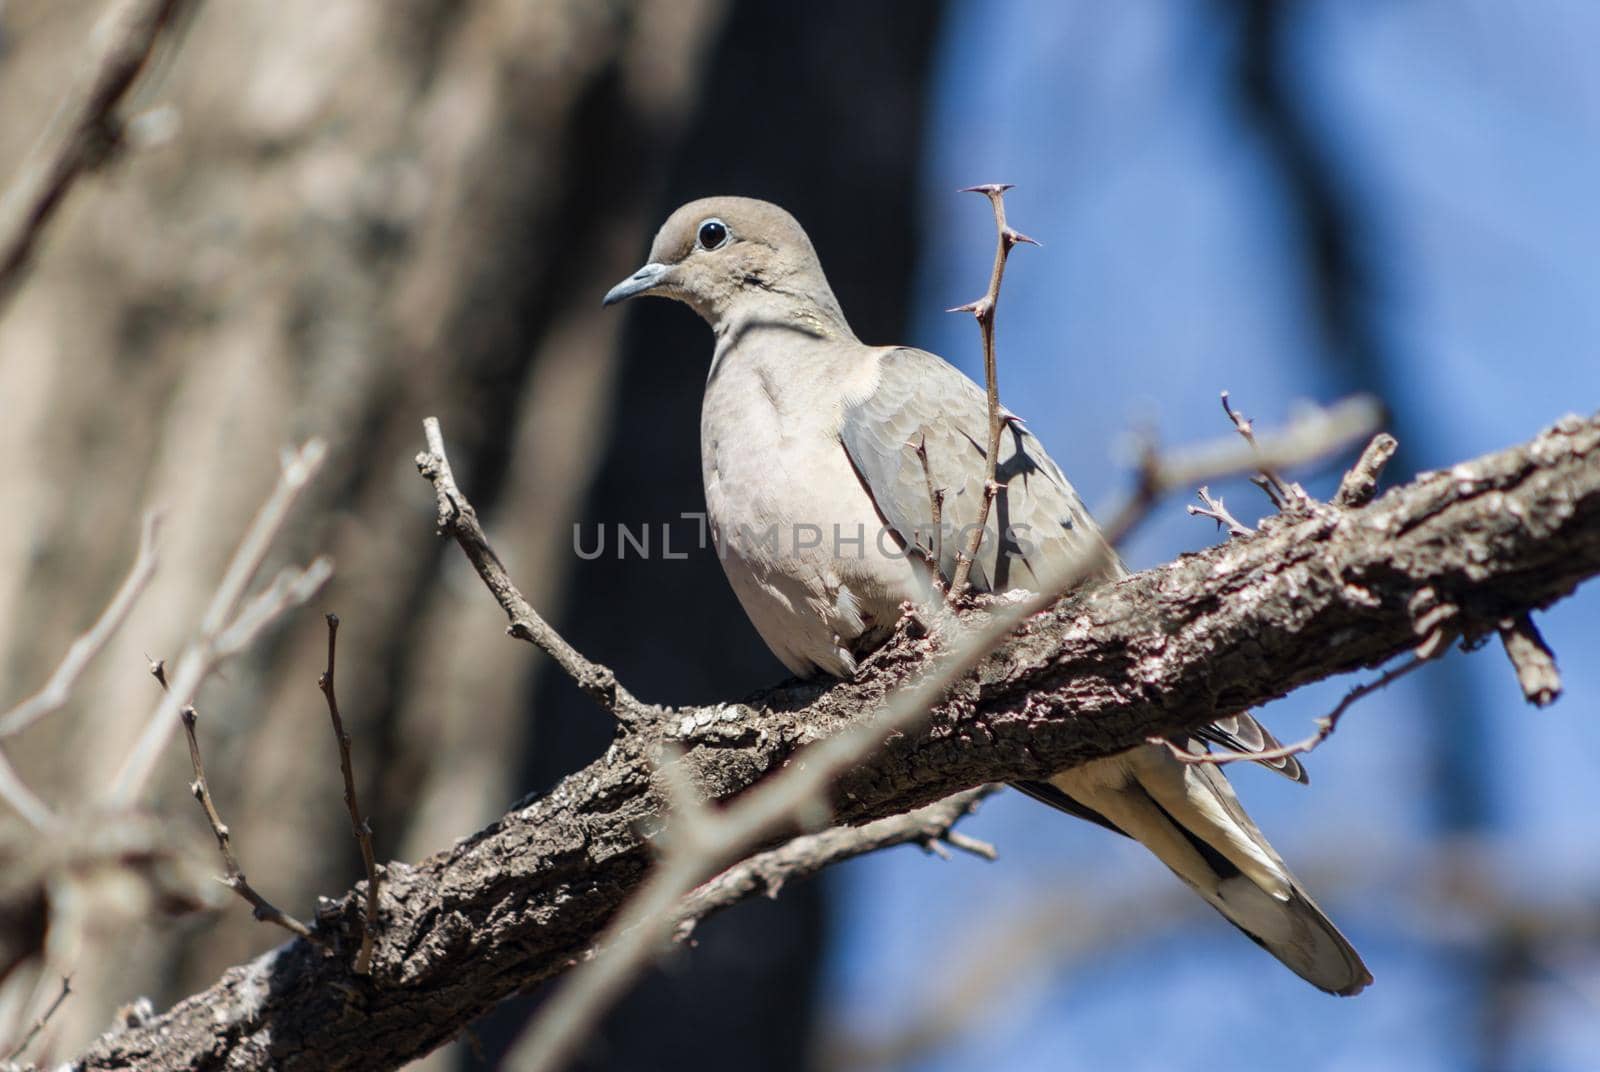 a pigeon perched on the branch in its natural habitat by GabrielaBertolini